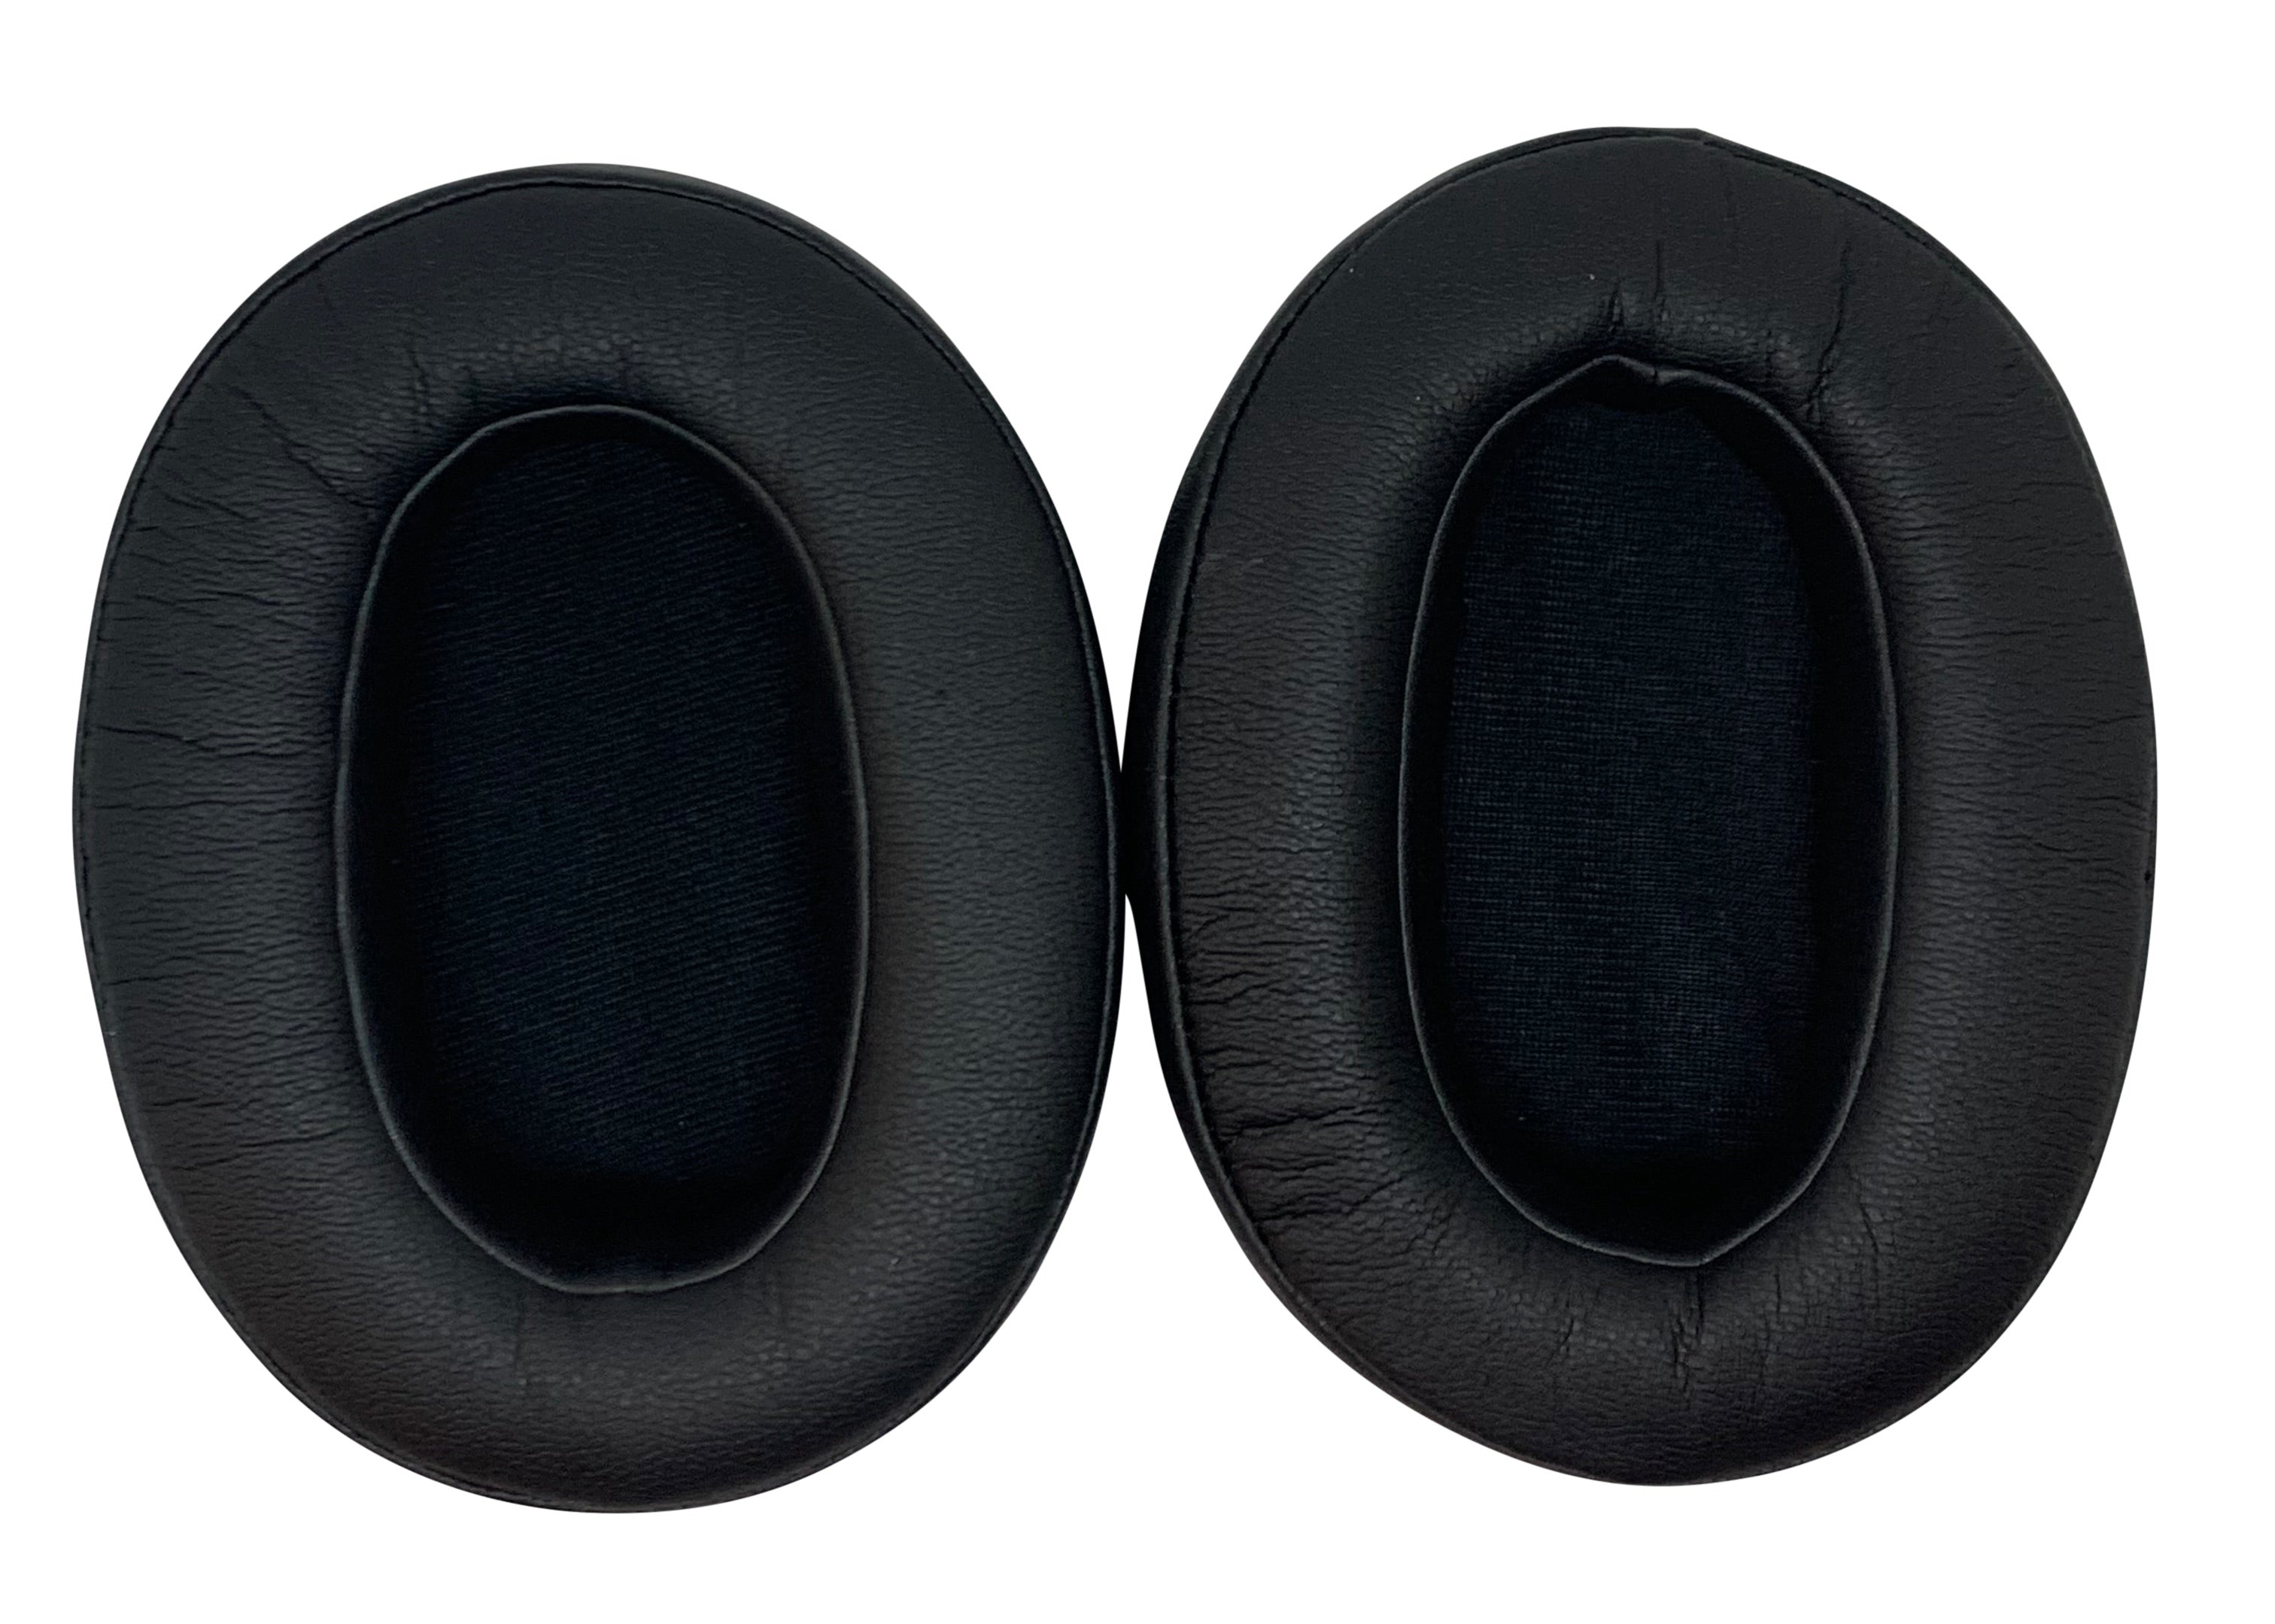 CentralSound Replacement Ear Pad Cushions for Sony WH-XB900N XB900 Headphones - CentralSound